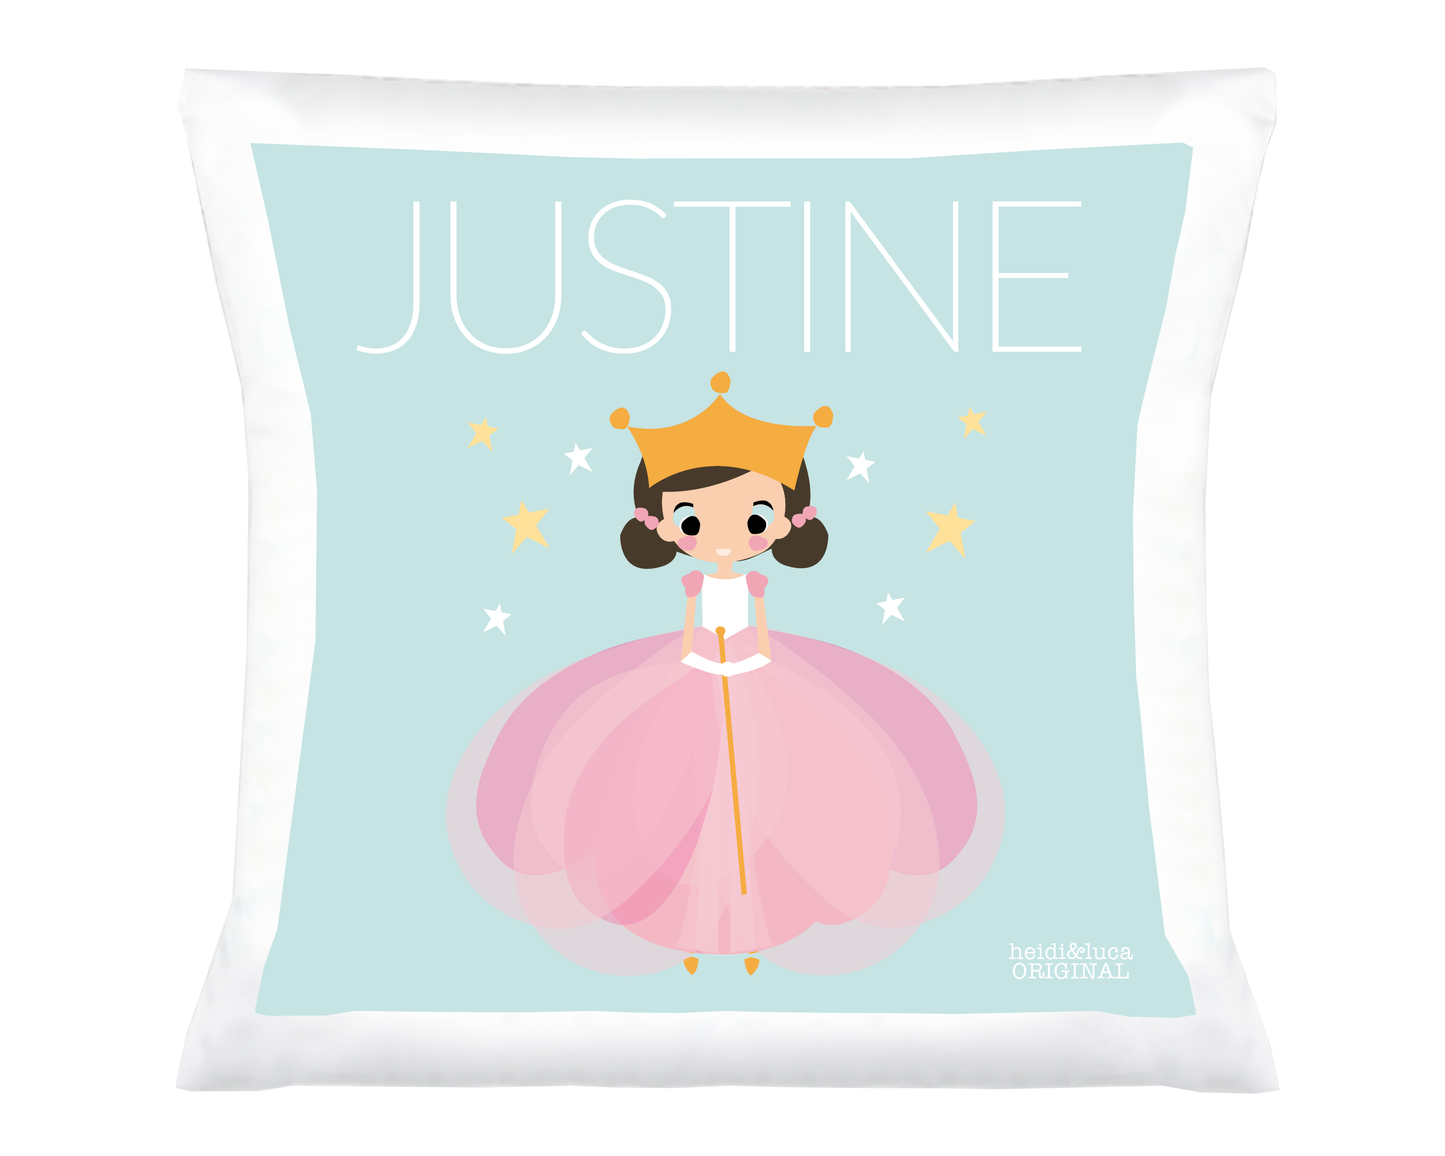 Appoline Cushion Cover